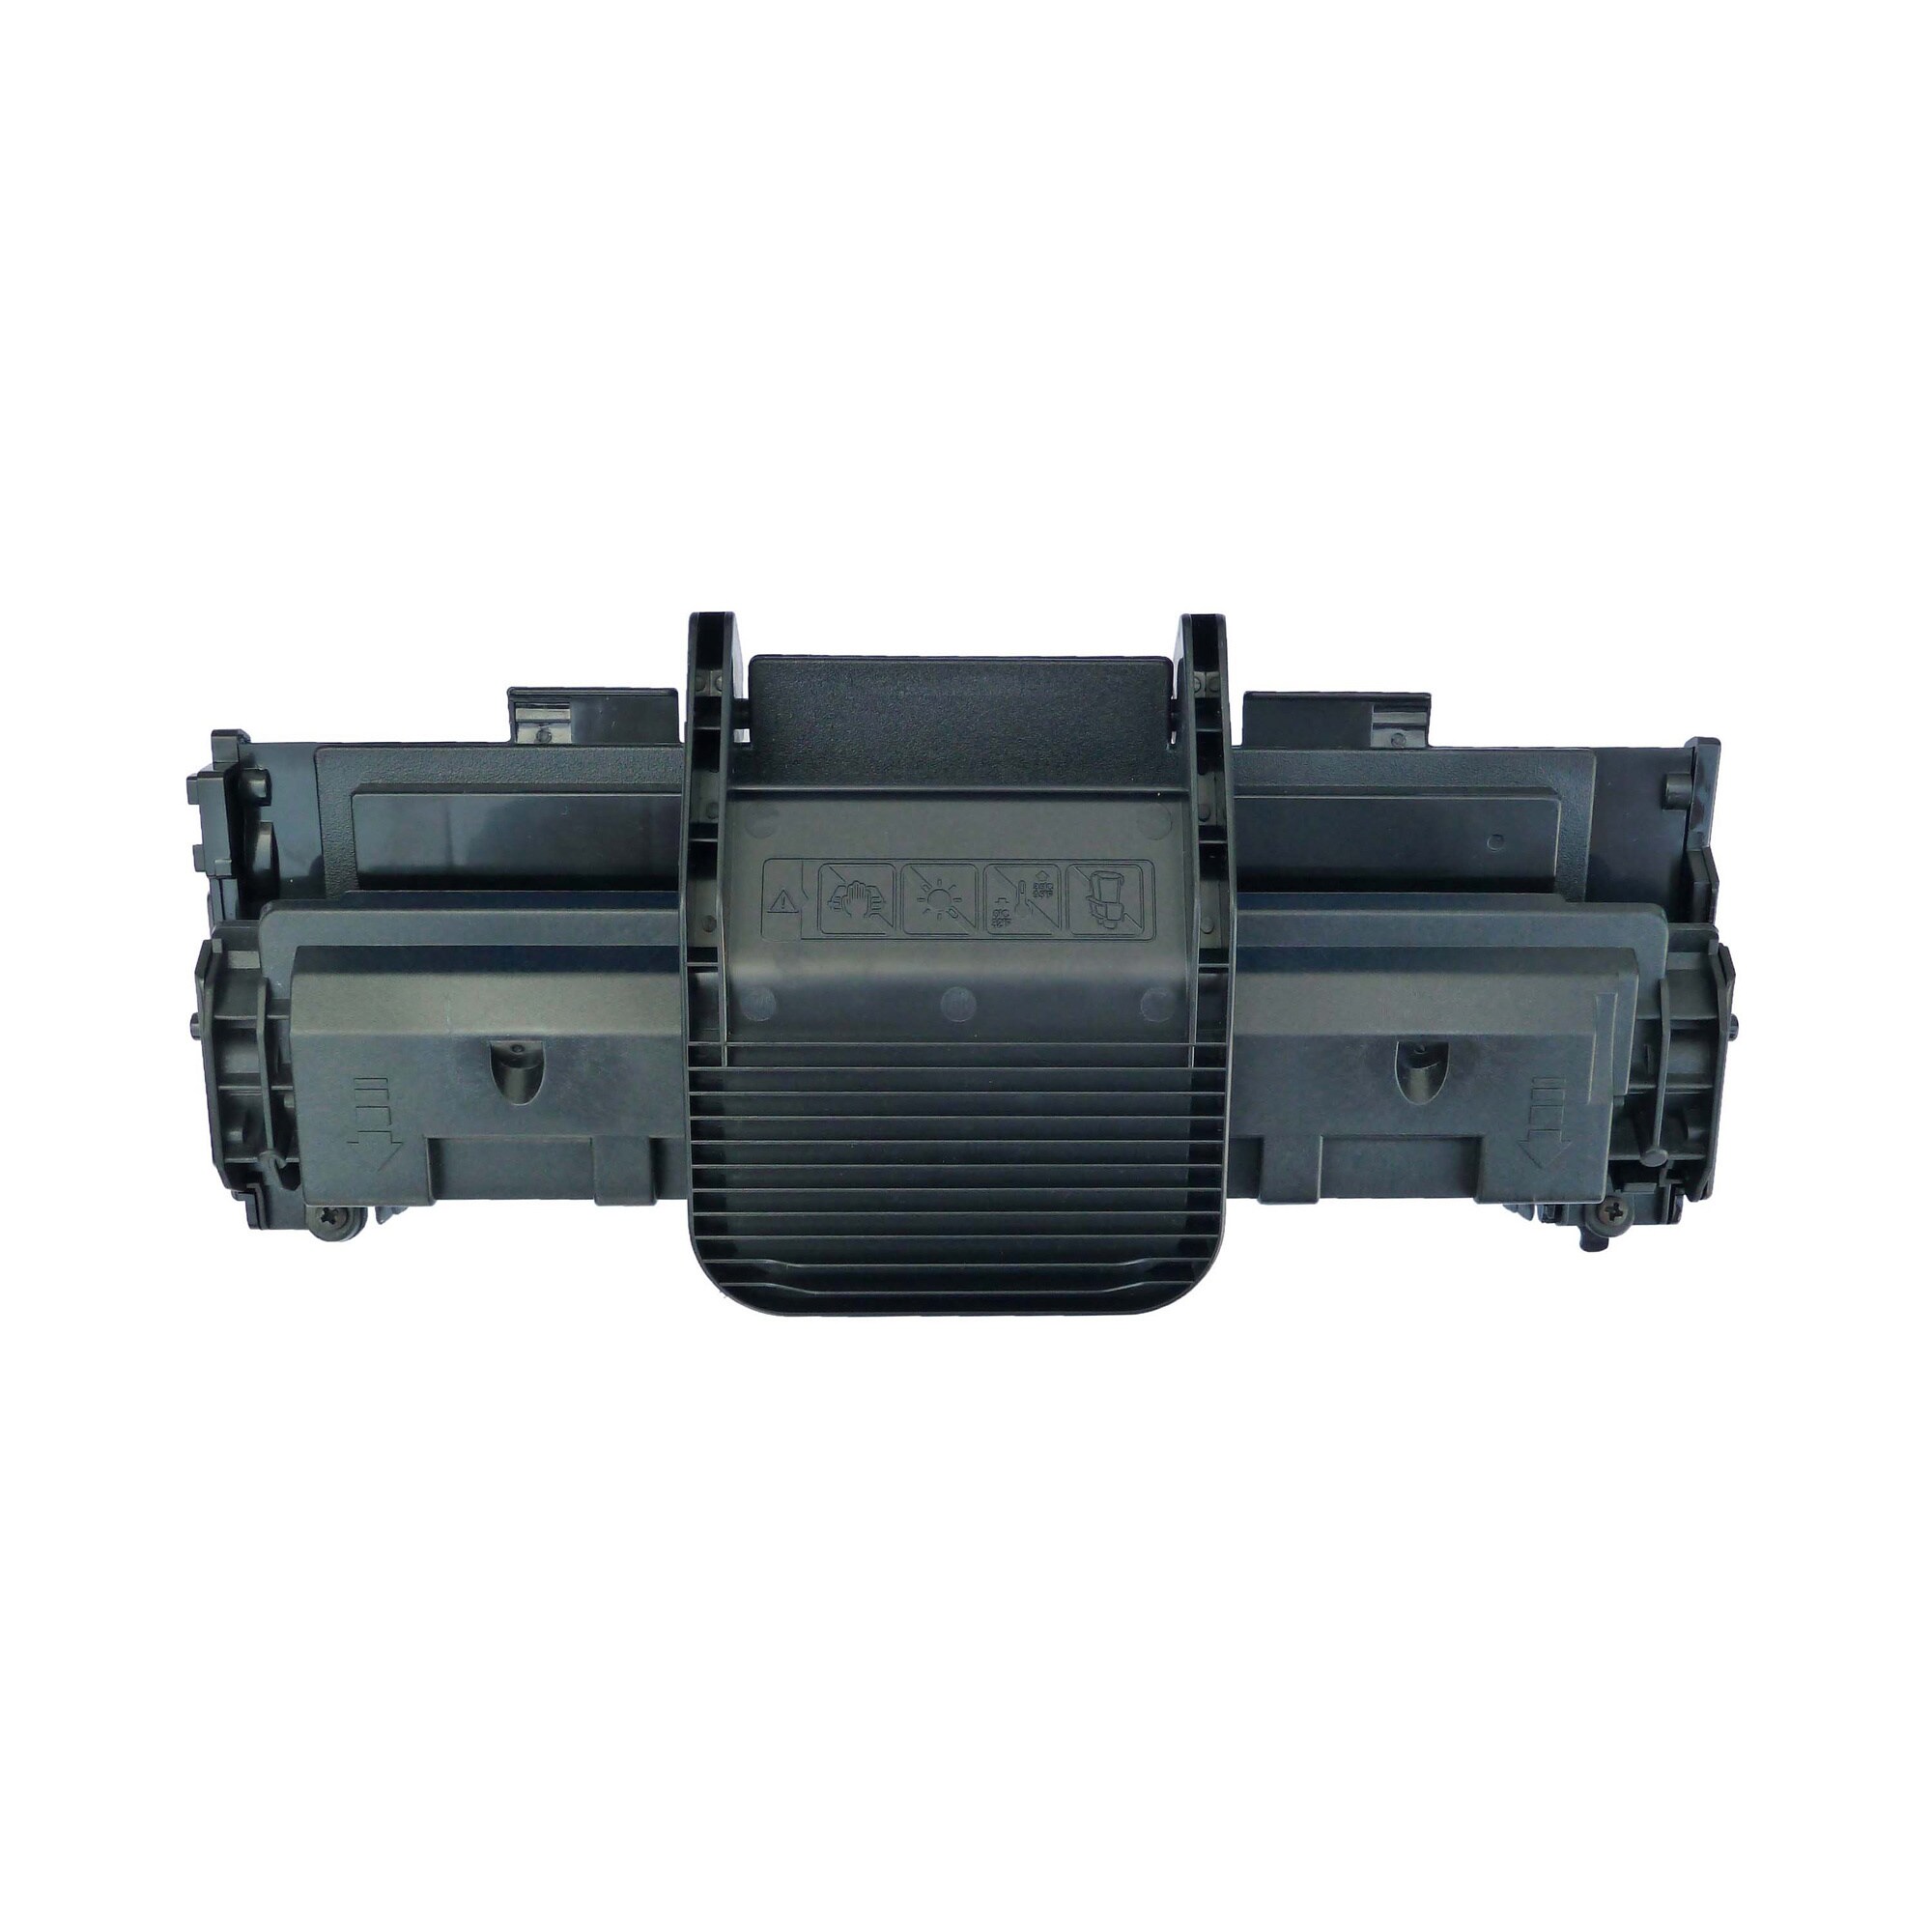 Xerox Workcentre Compatible Replacement High Capacity Black Toner Cartridge